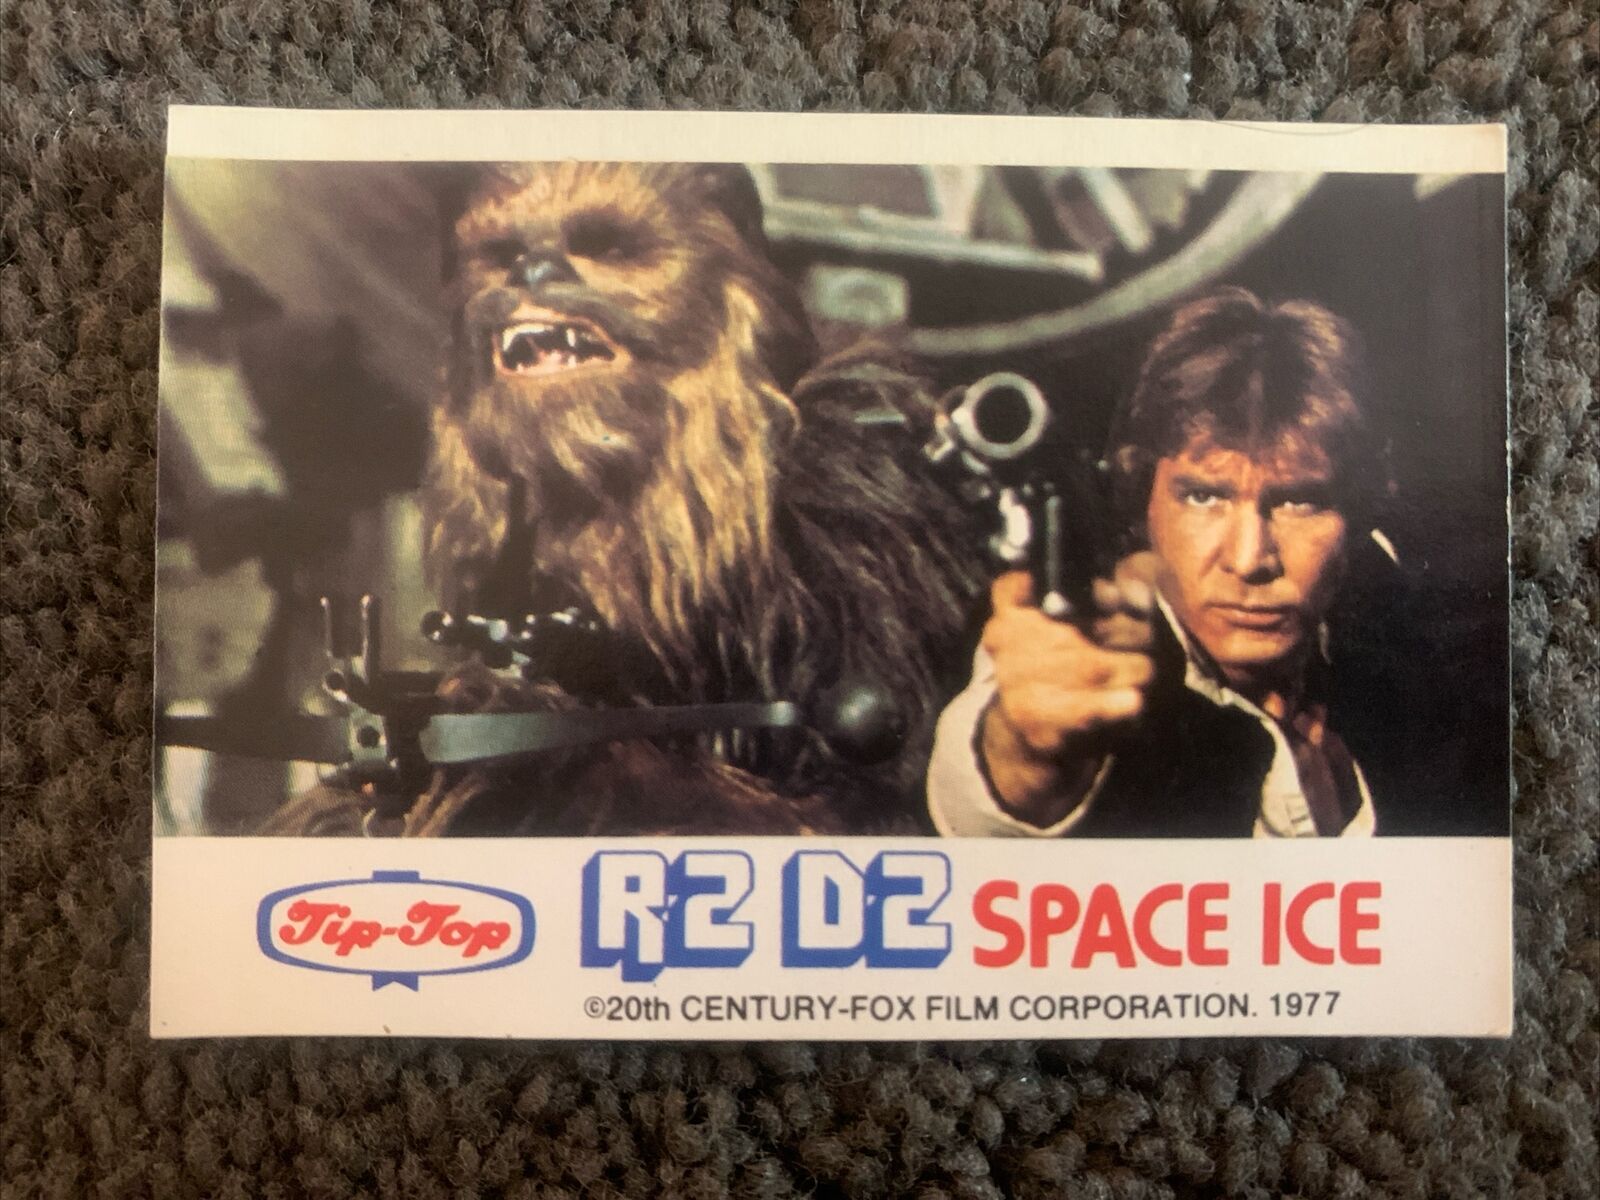 1977 Tip Top Star Wars R2-D2 Space Ice Stickers - Han Solo and Chewbaca